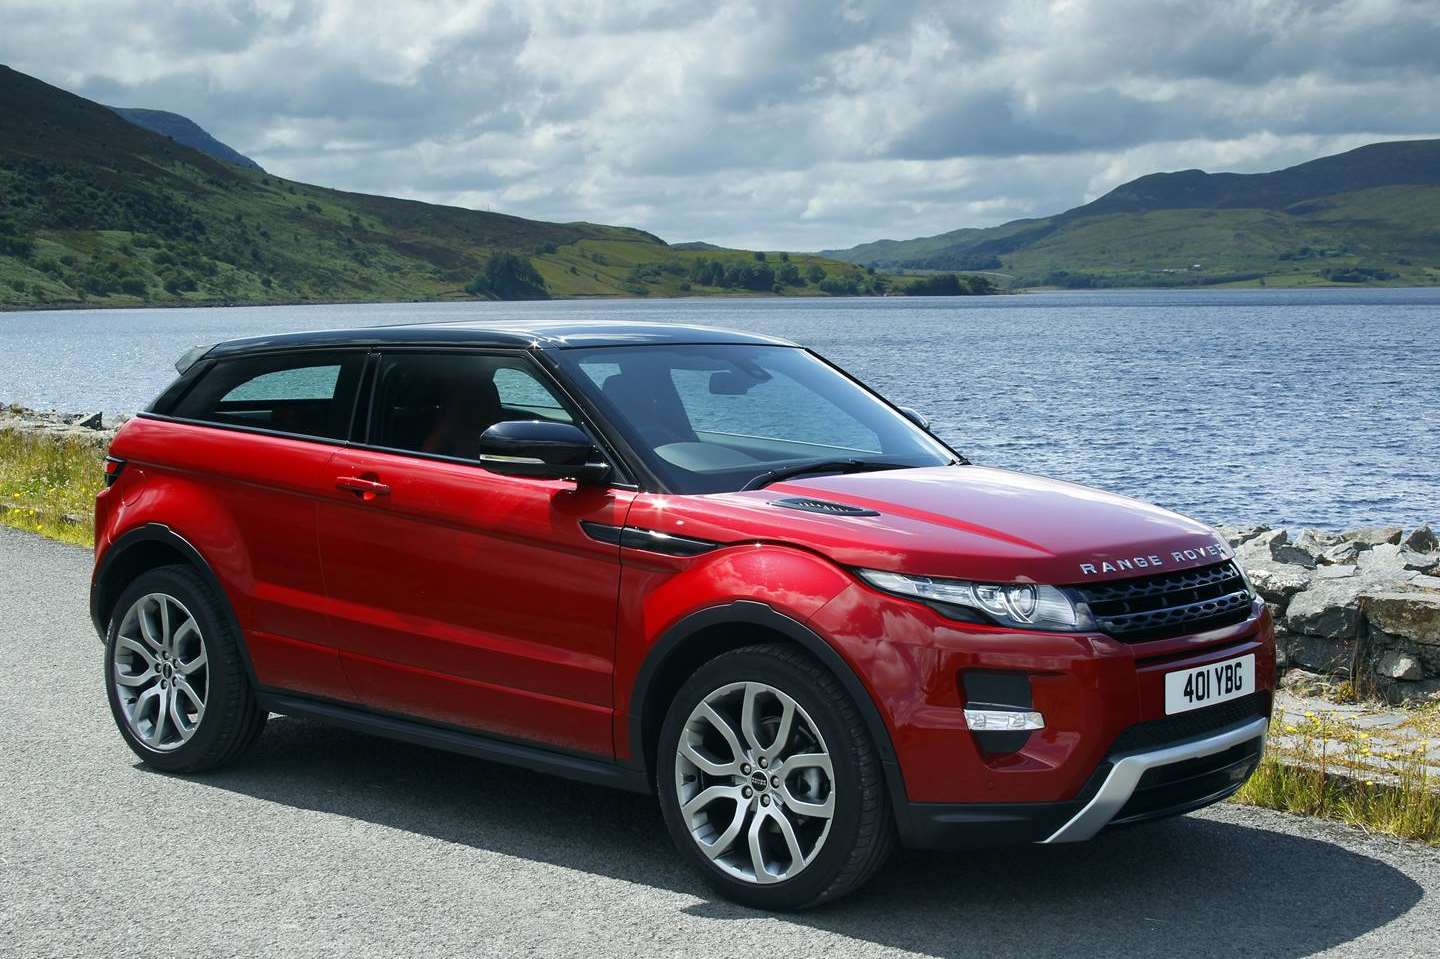 The 2.0-litre petrol Evoque is the closes thing to a hot hatch